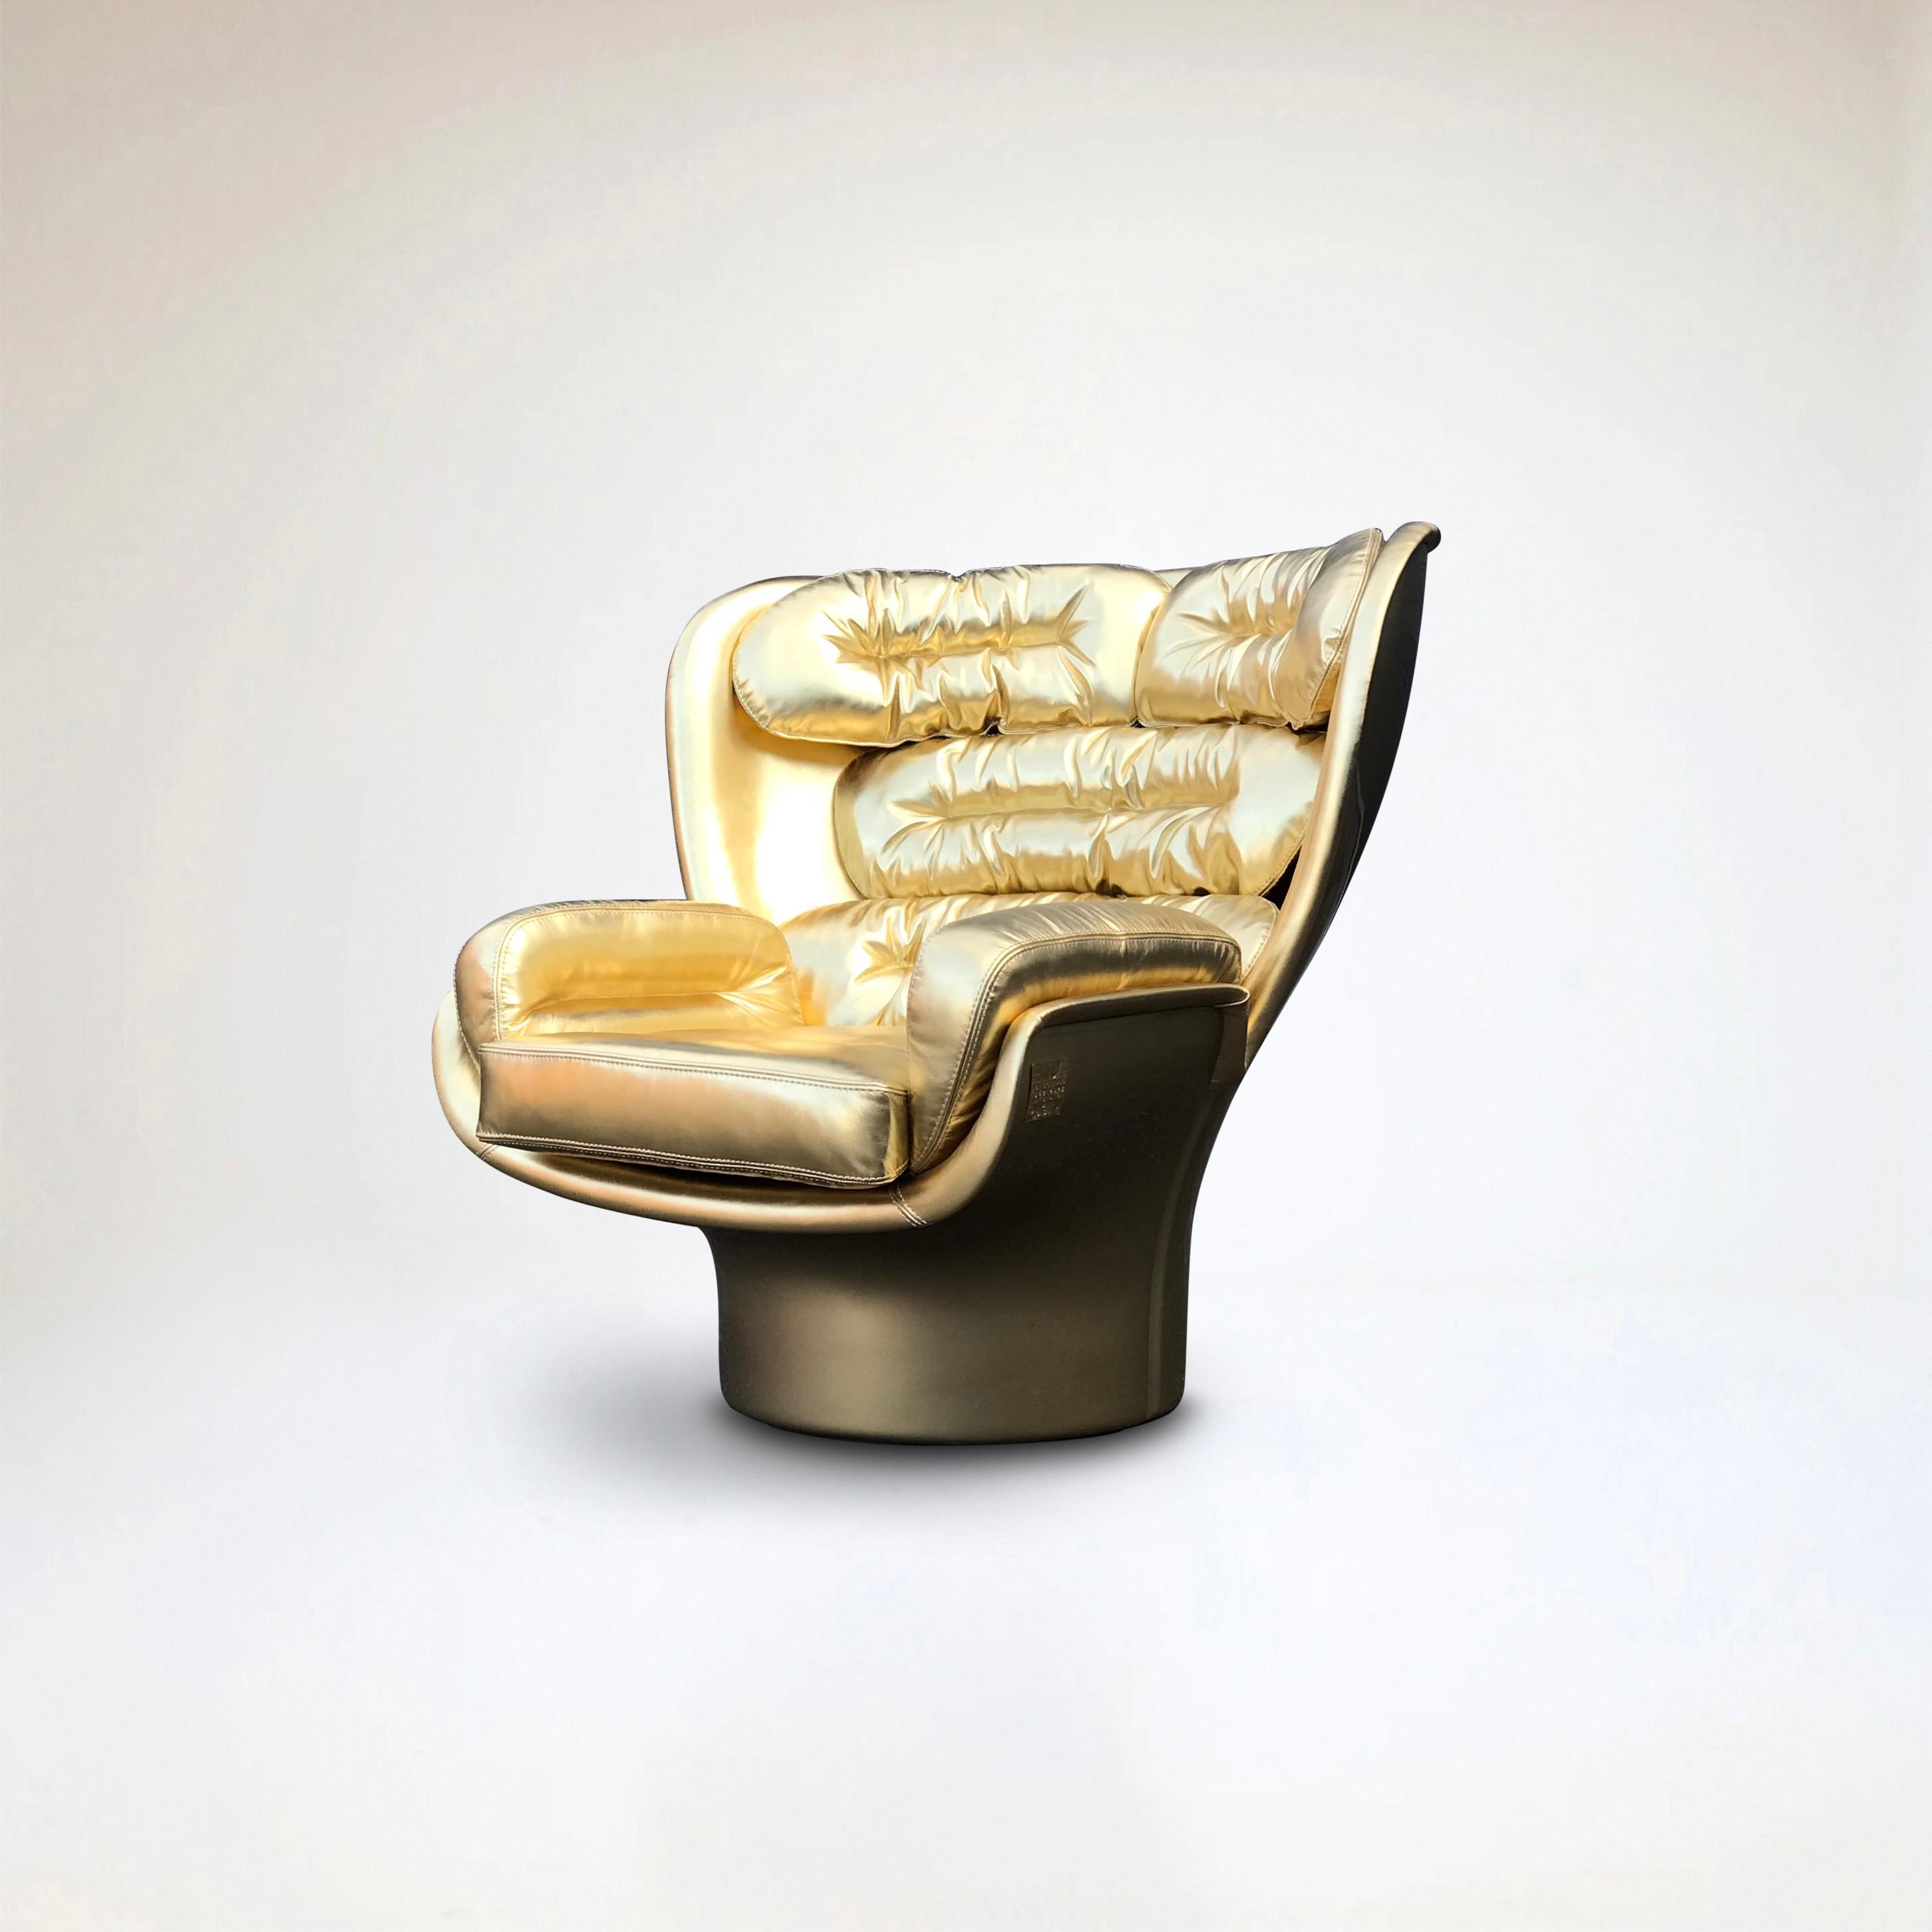 Contemporary Golden Limited Edition Elda Chair by Joe Colombo for Longhi Italy no. 7/20 For Sale